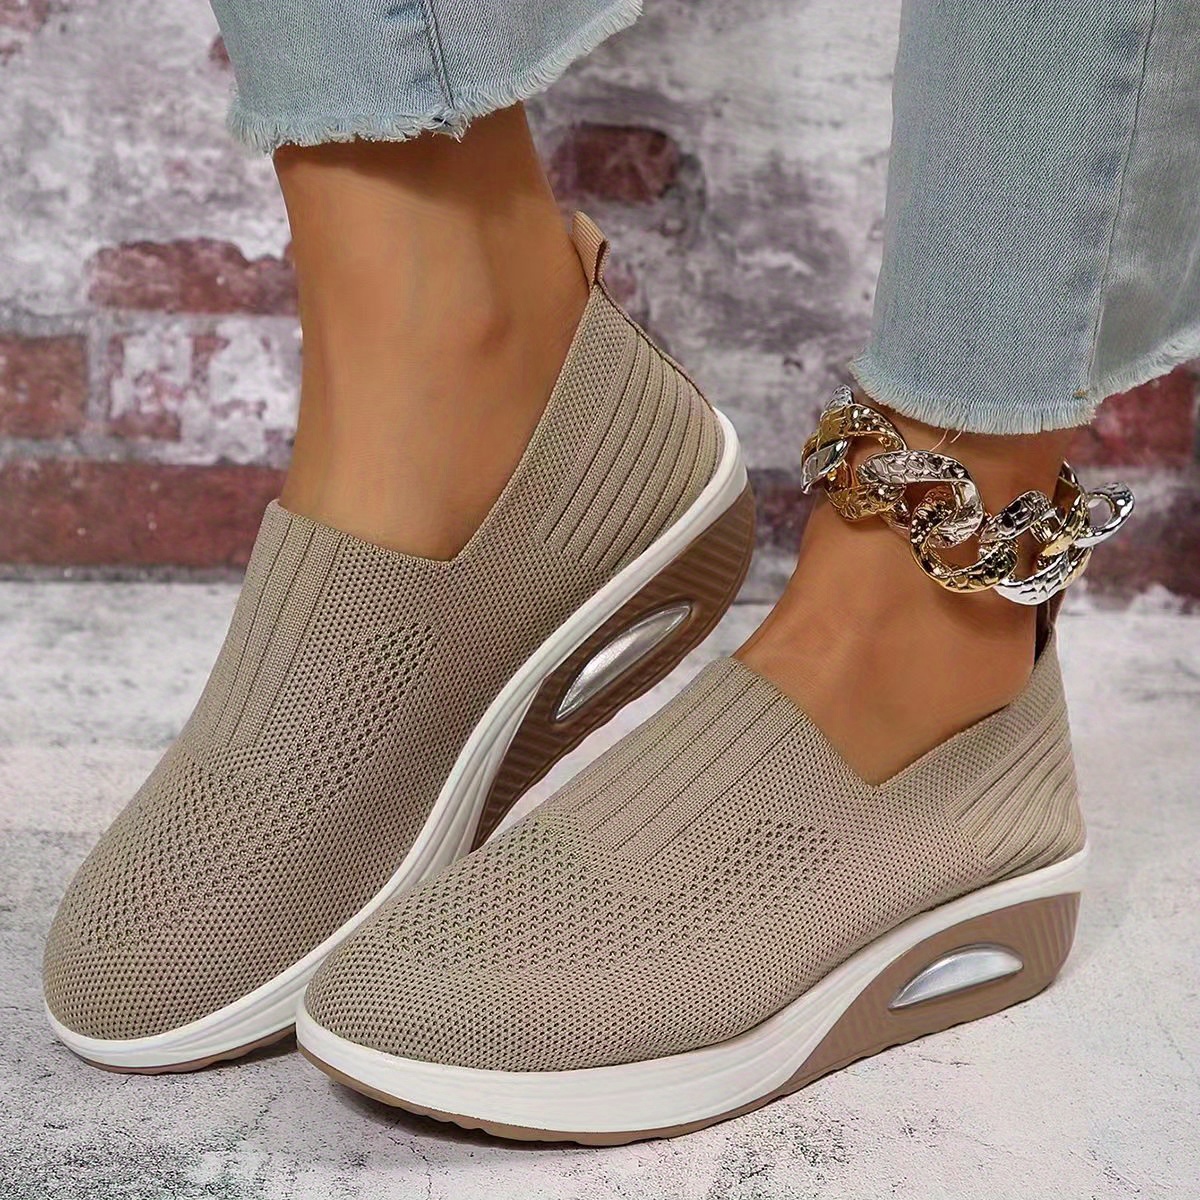 womens air cushion sock shoes comfort knitted slip on platform shoes casual walking shoes details 1